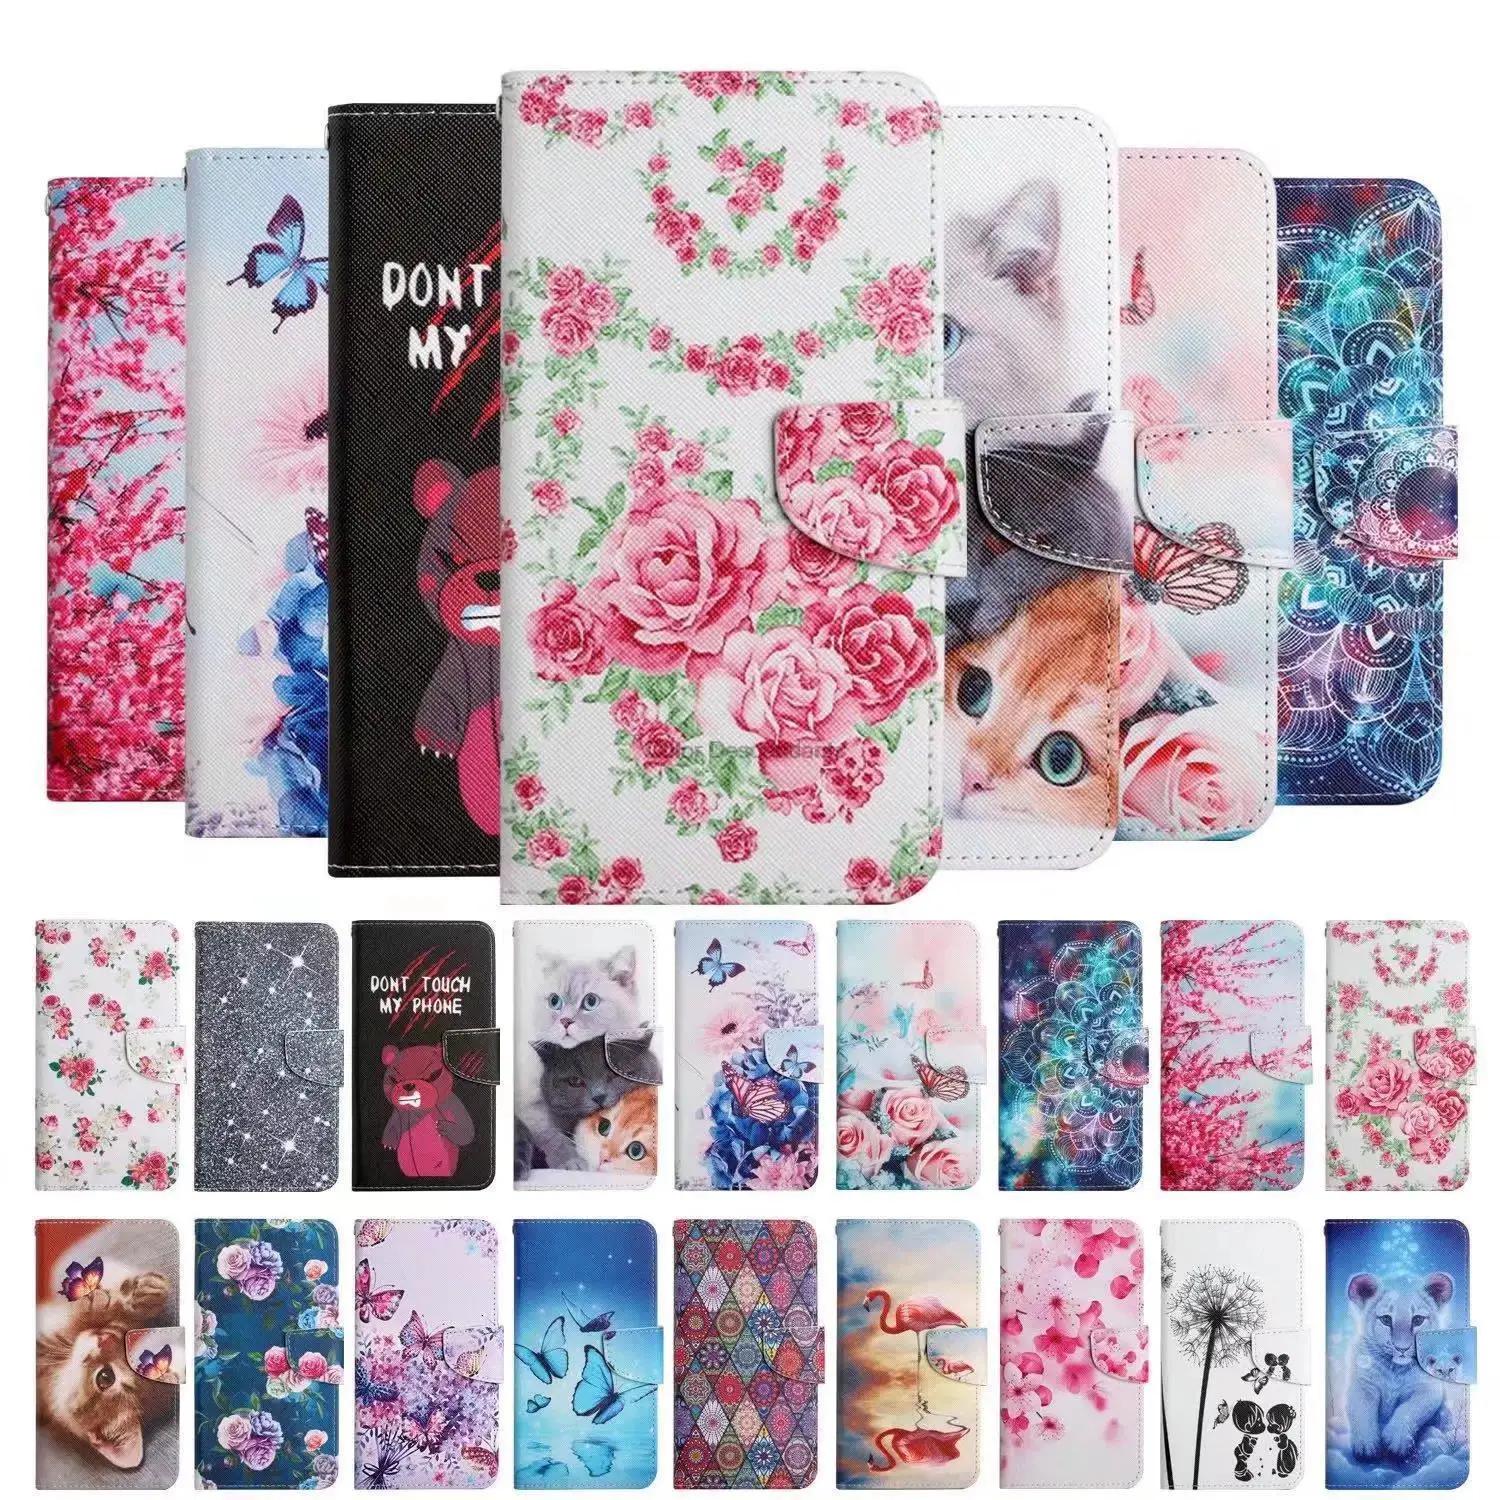 Leather Case on For OPPO A73 for Coque oppo A73 Oppo A73 a73 CPH2099 6.44 inch Cover Flip Wallet Phone Cases oppo A7